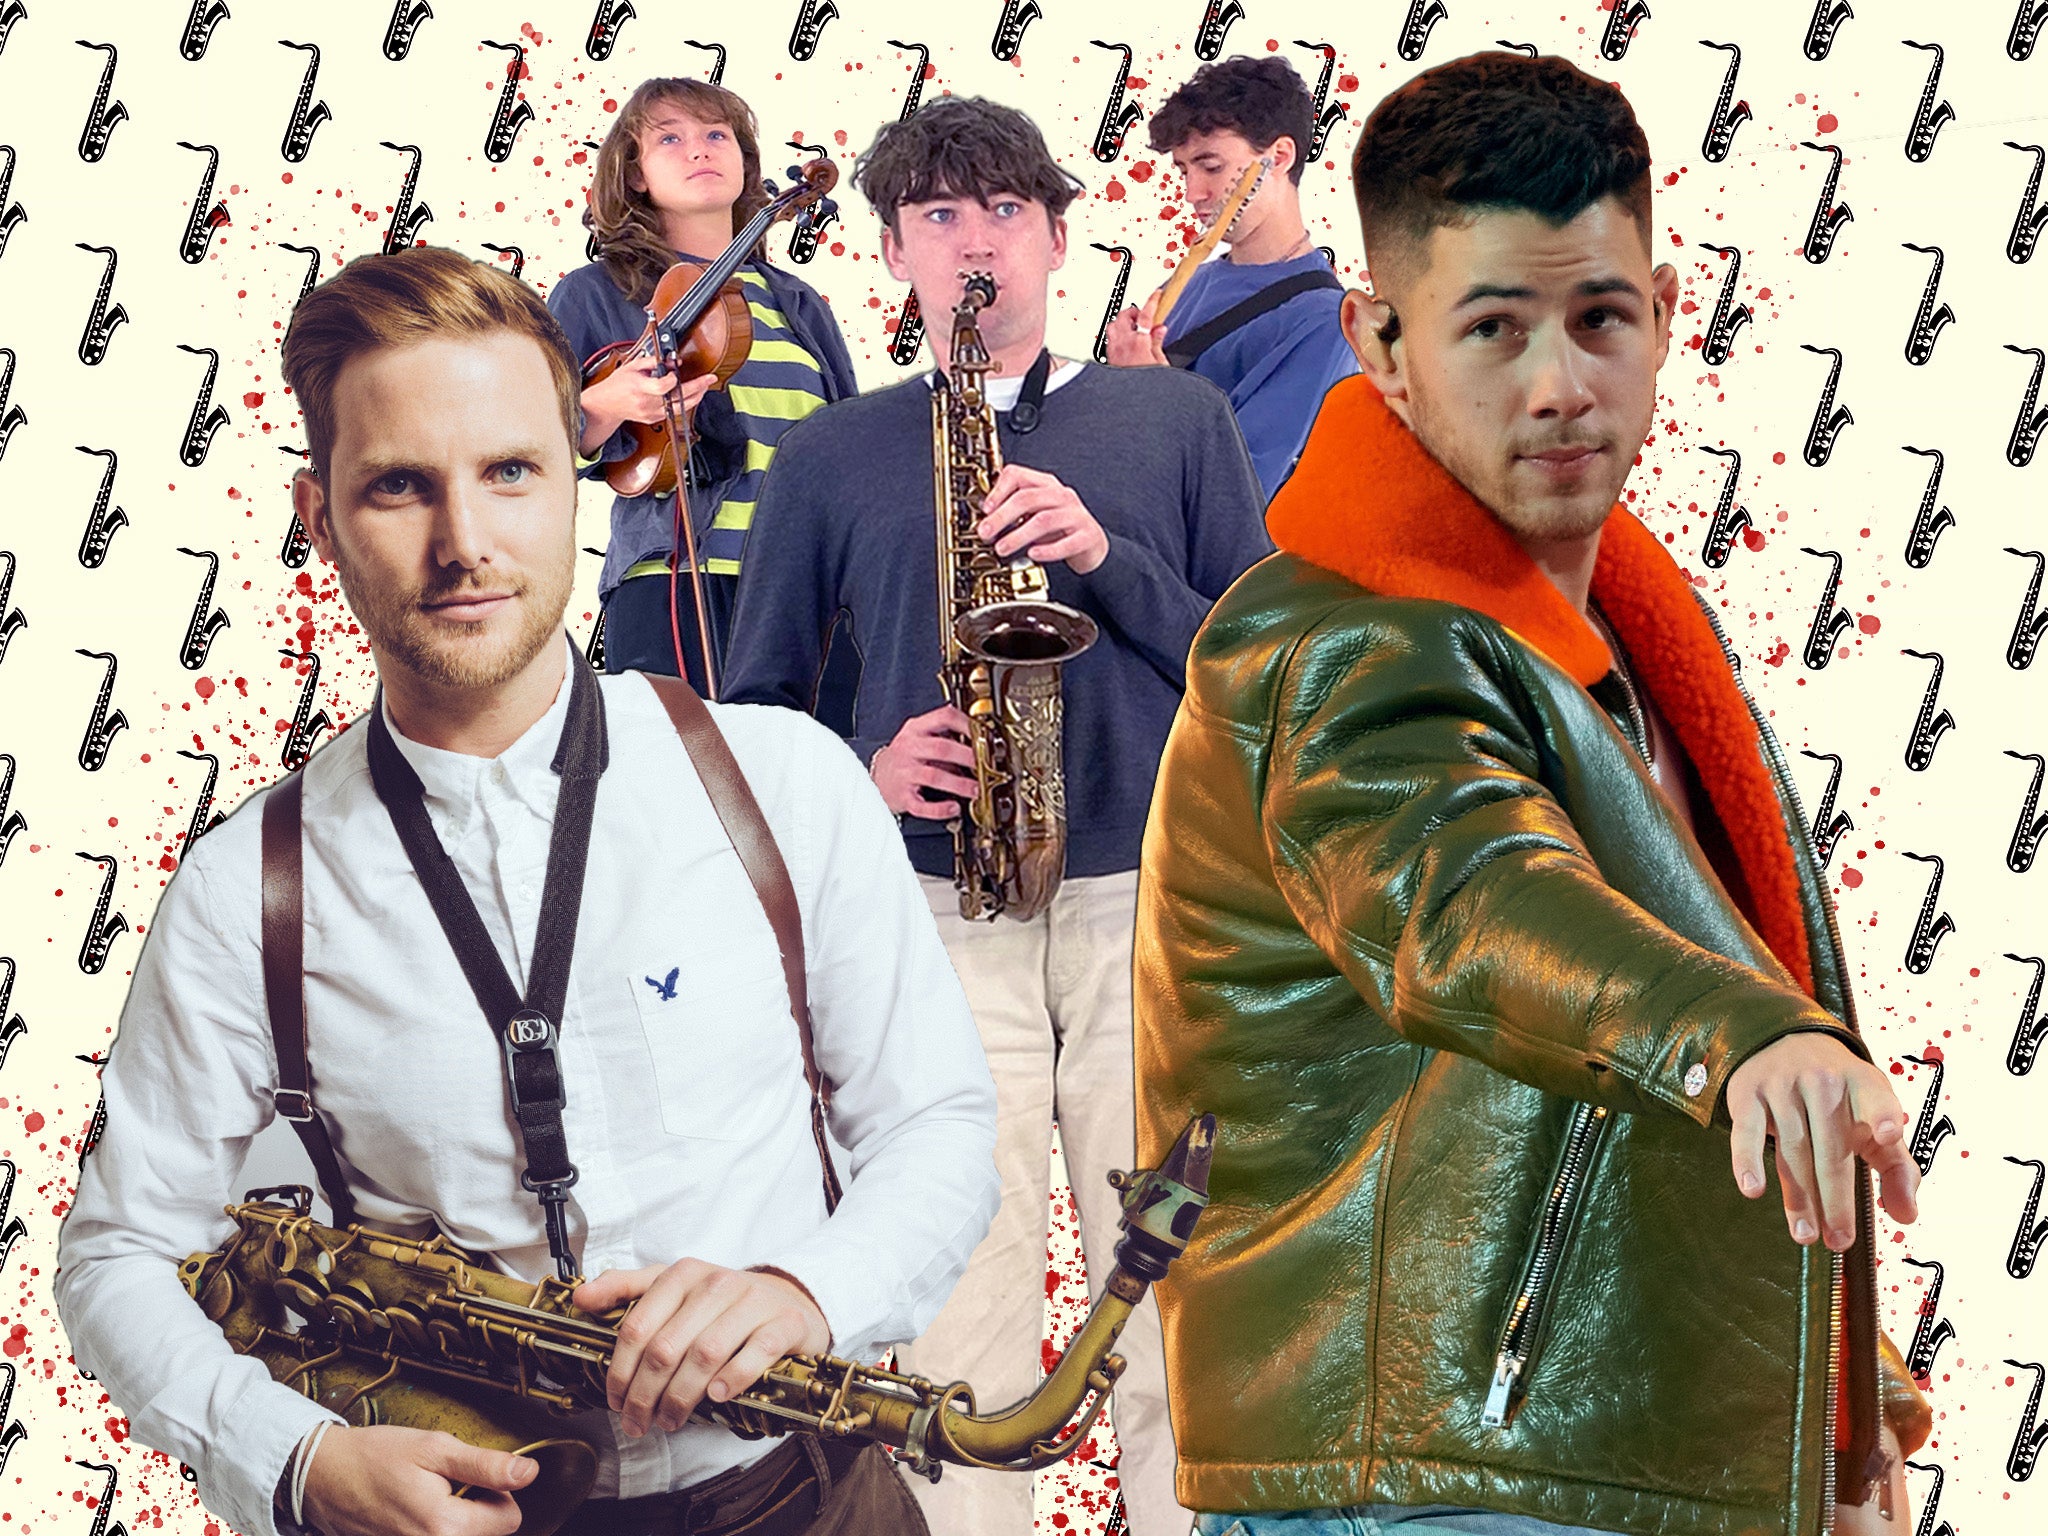 Let's talk about sax, baby: How one of music's most maligned